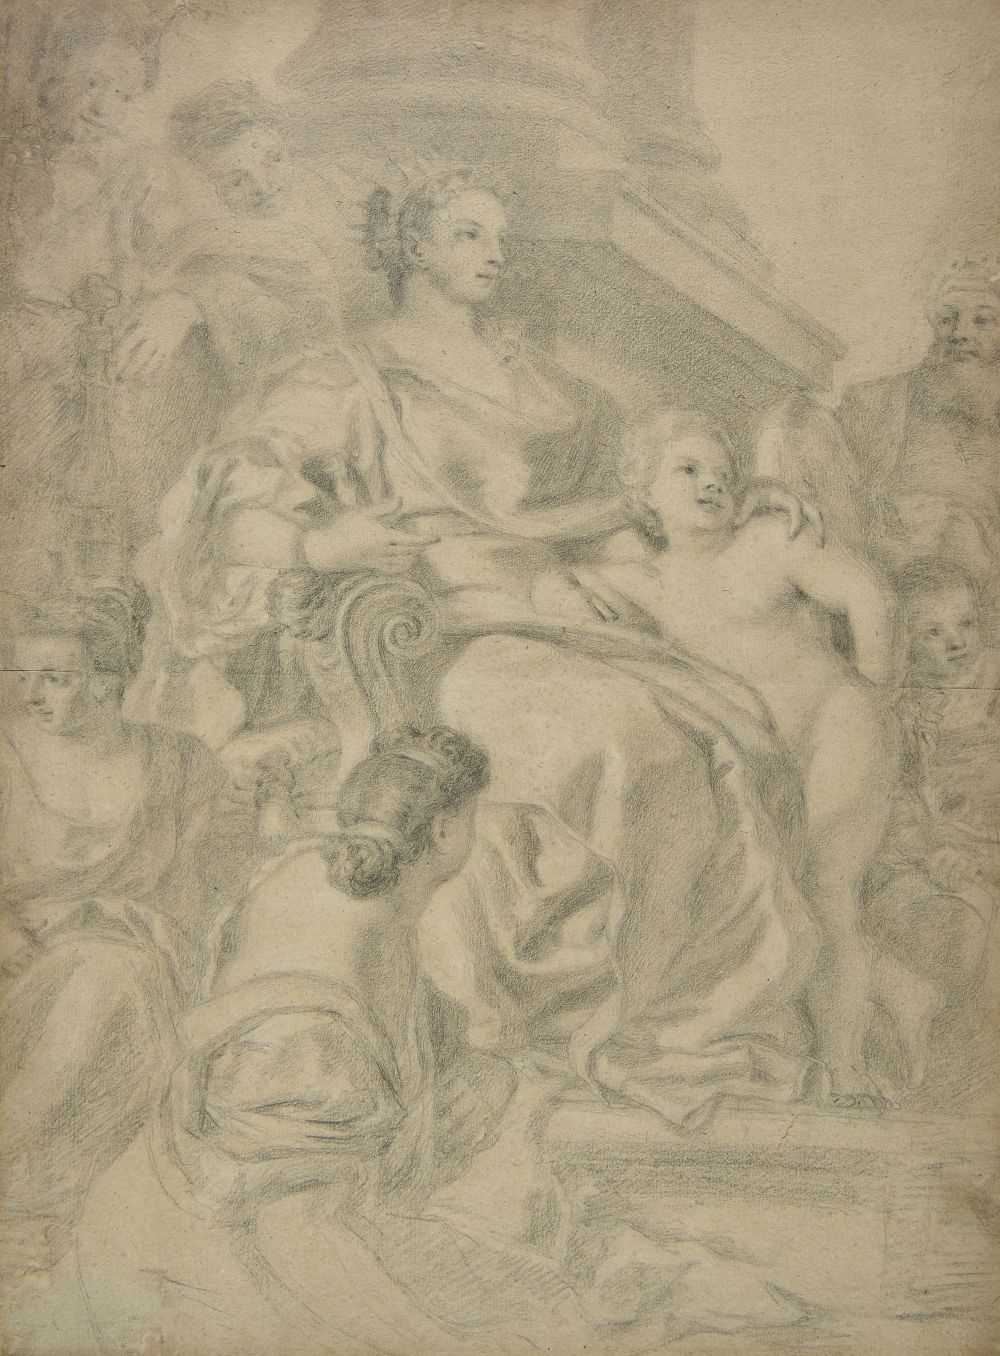 Lot 198 - Italian School. Detail from Aeneas at the Court of Dido, after Francesco Solimena, mid 18th century